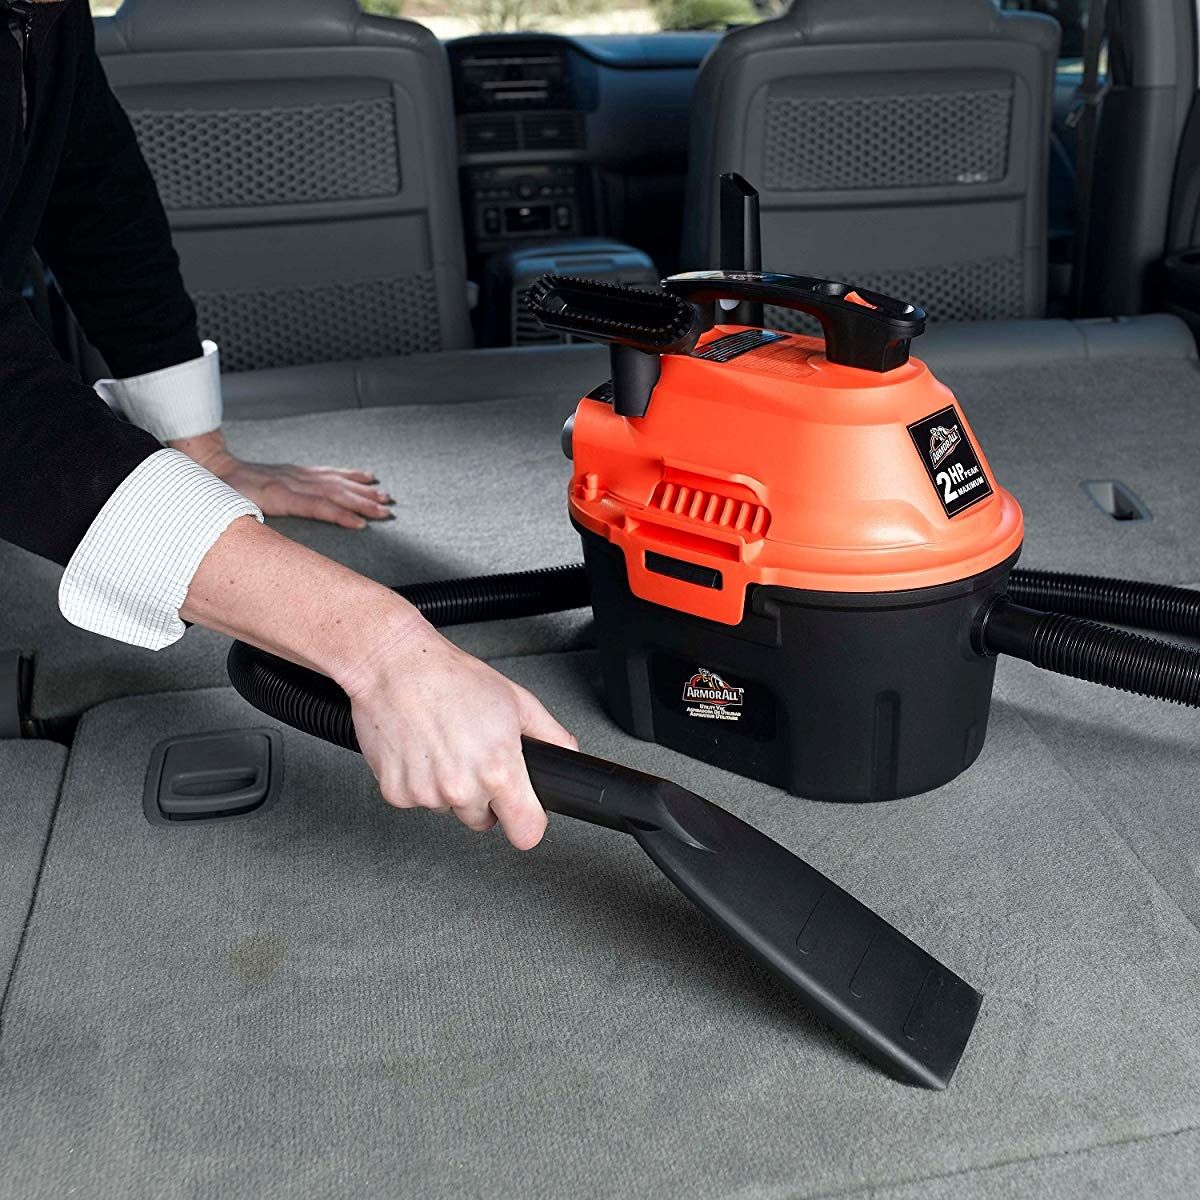 Portable Cleaning Solution: Keep Your Car Clean with the Armor All AA255 Utility Wet/Dry Vacuum Cleaner